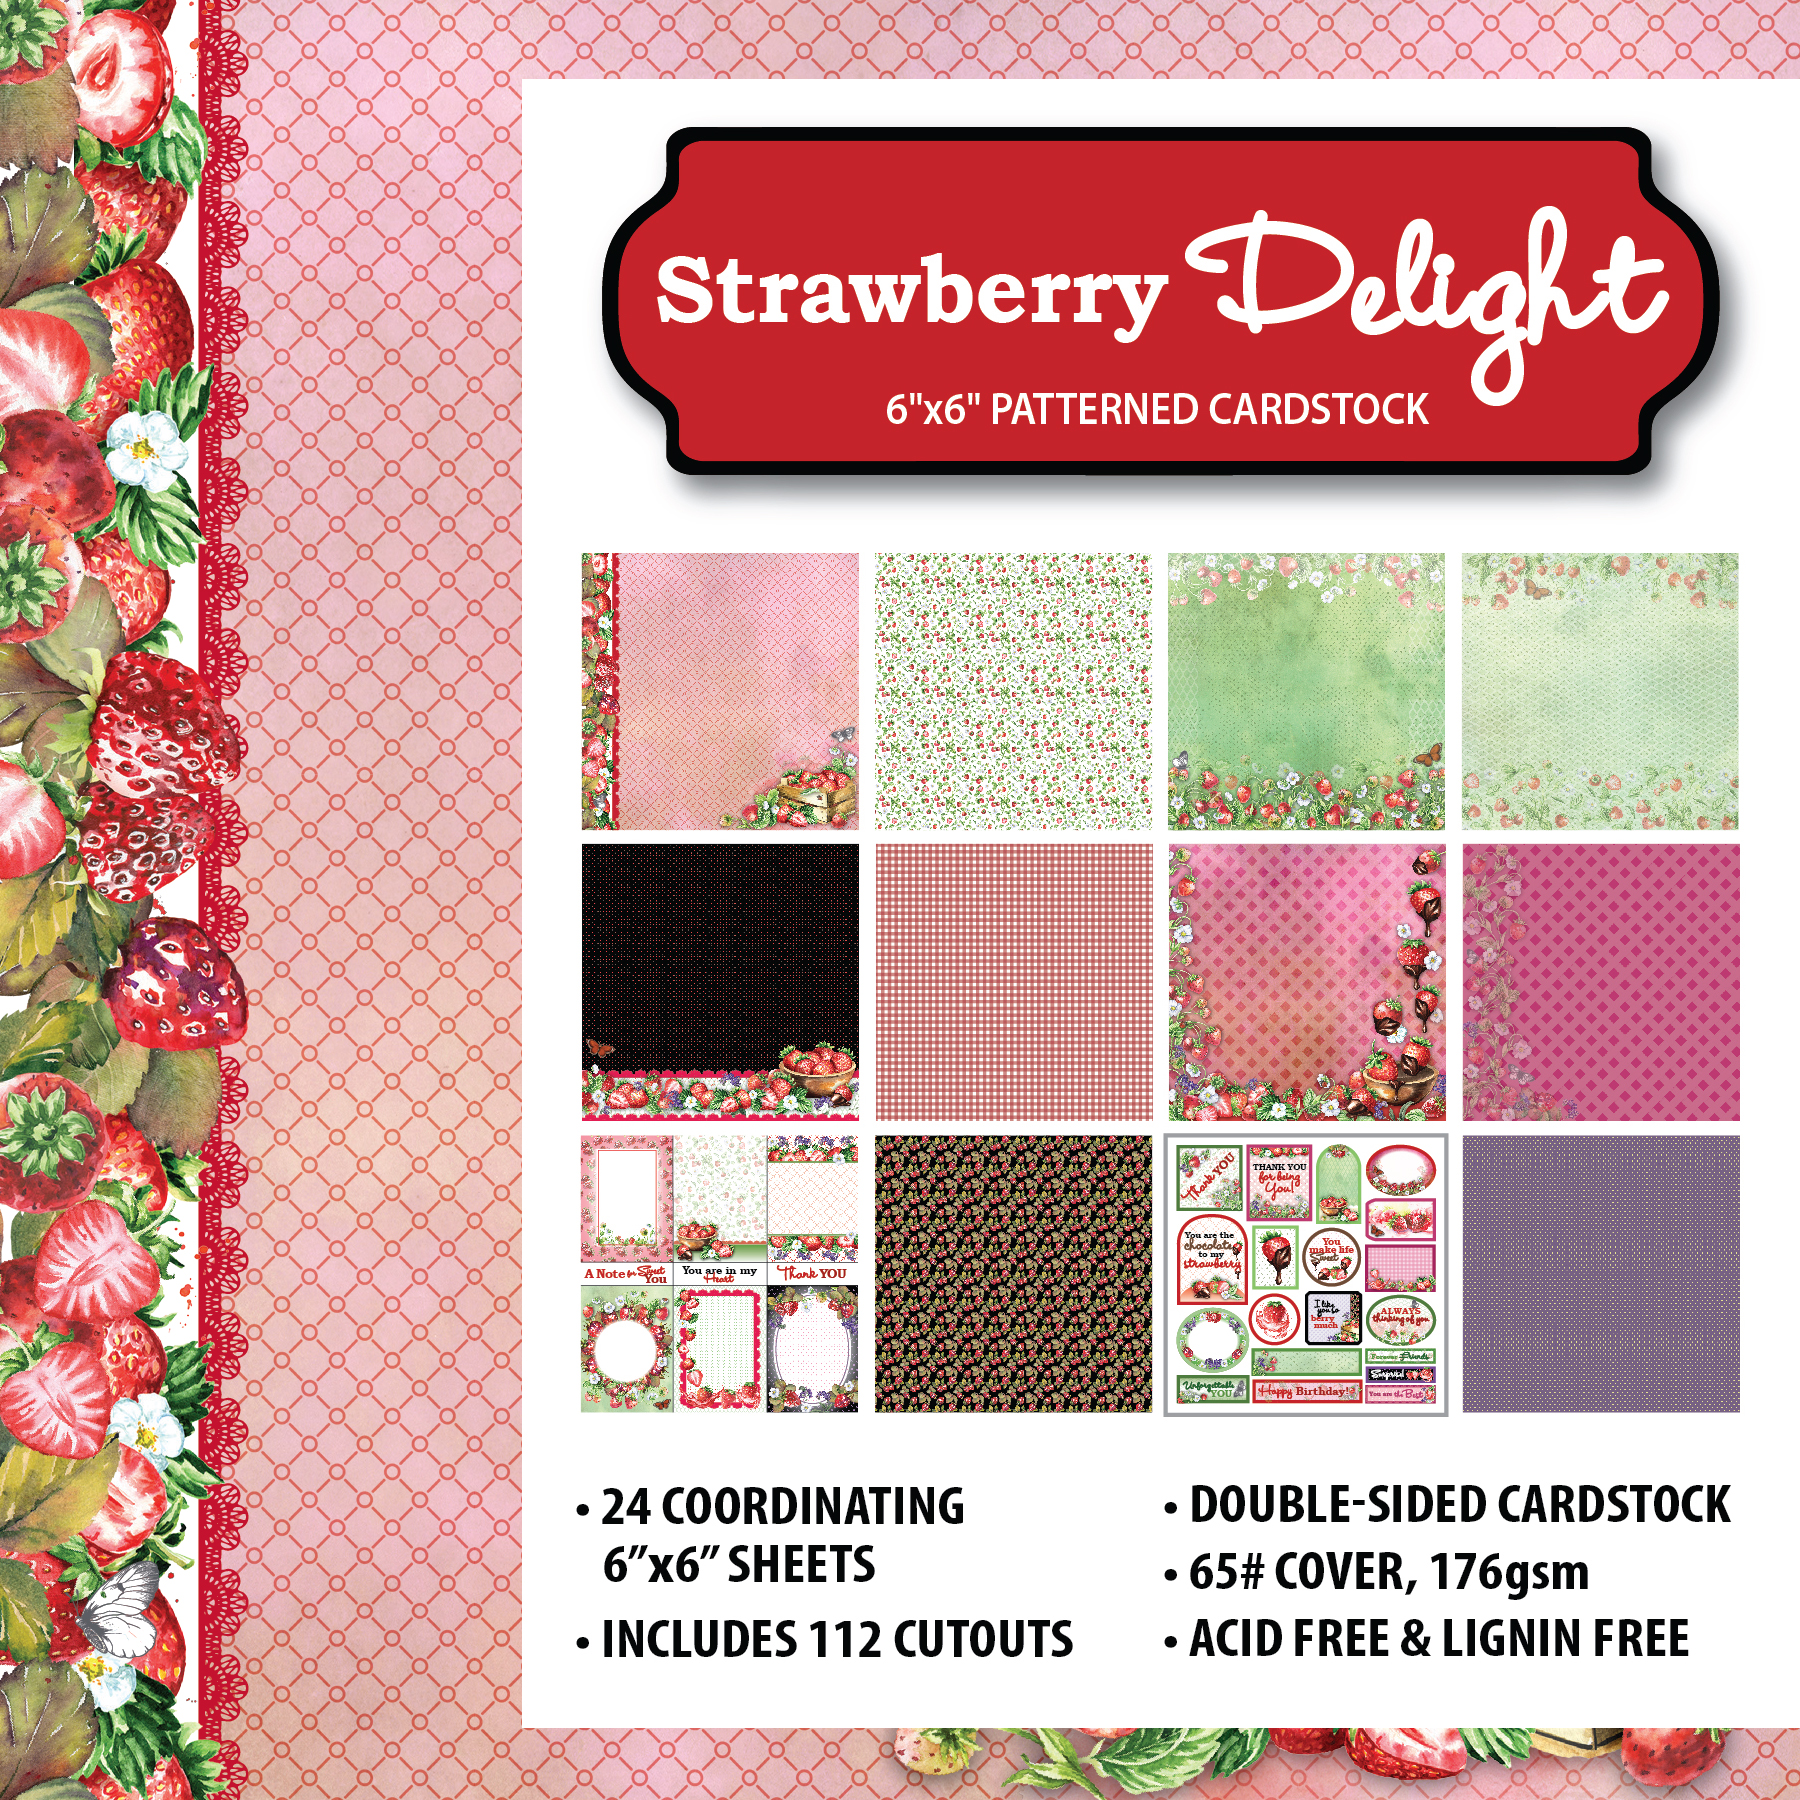 Strawberry Delight 6x6 Patterned Cardstock